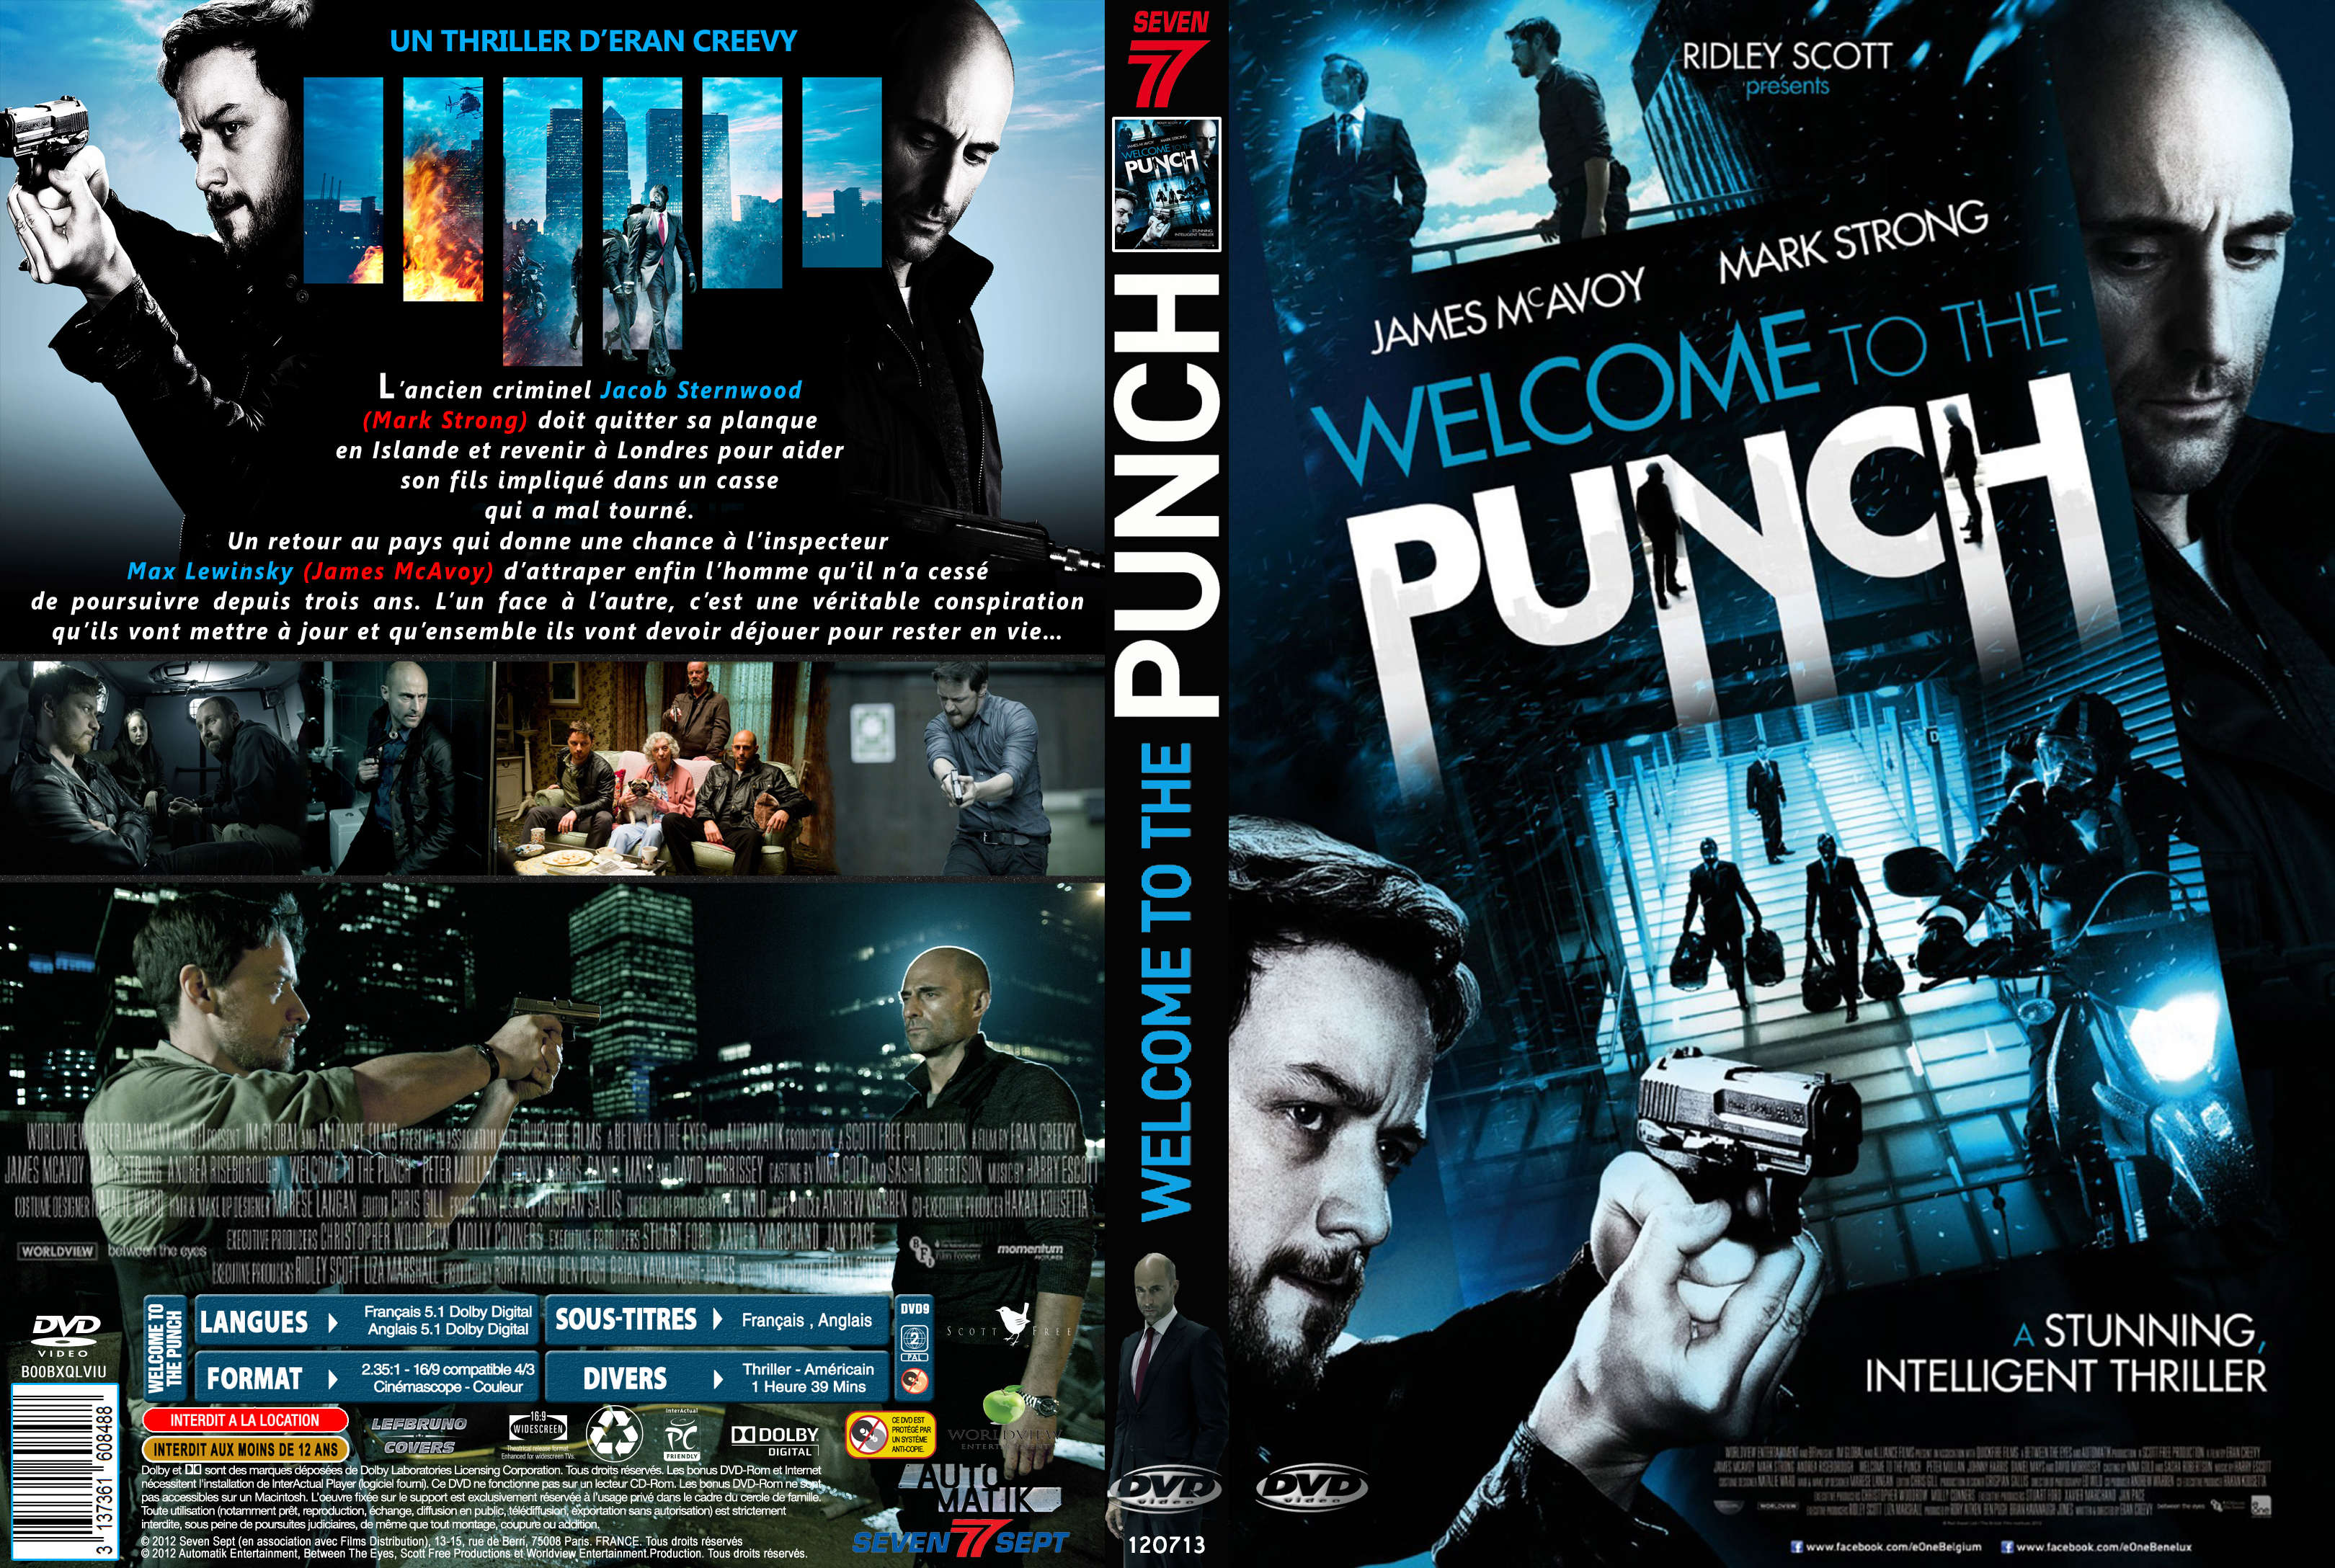 Jaquette DVD Welcome to the Punch custom v2